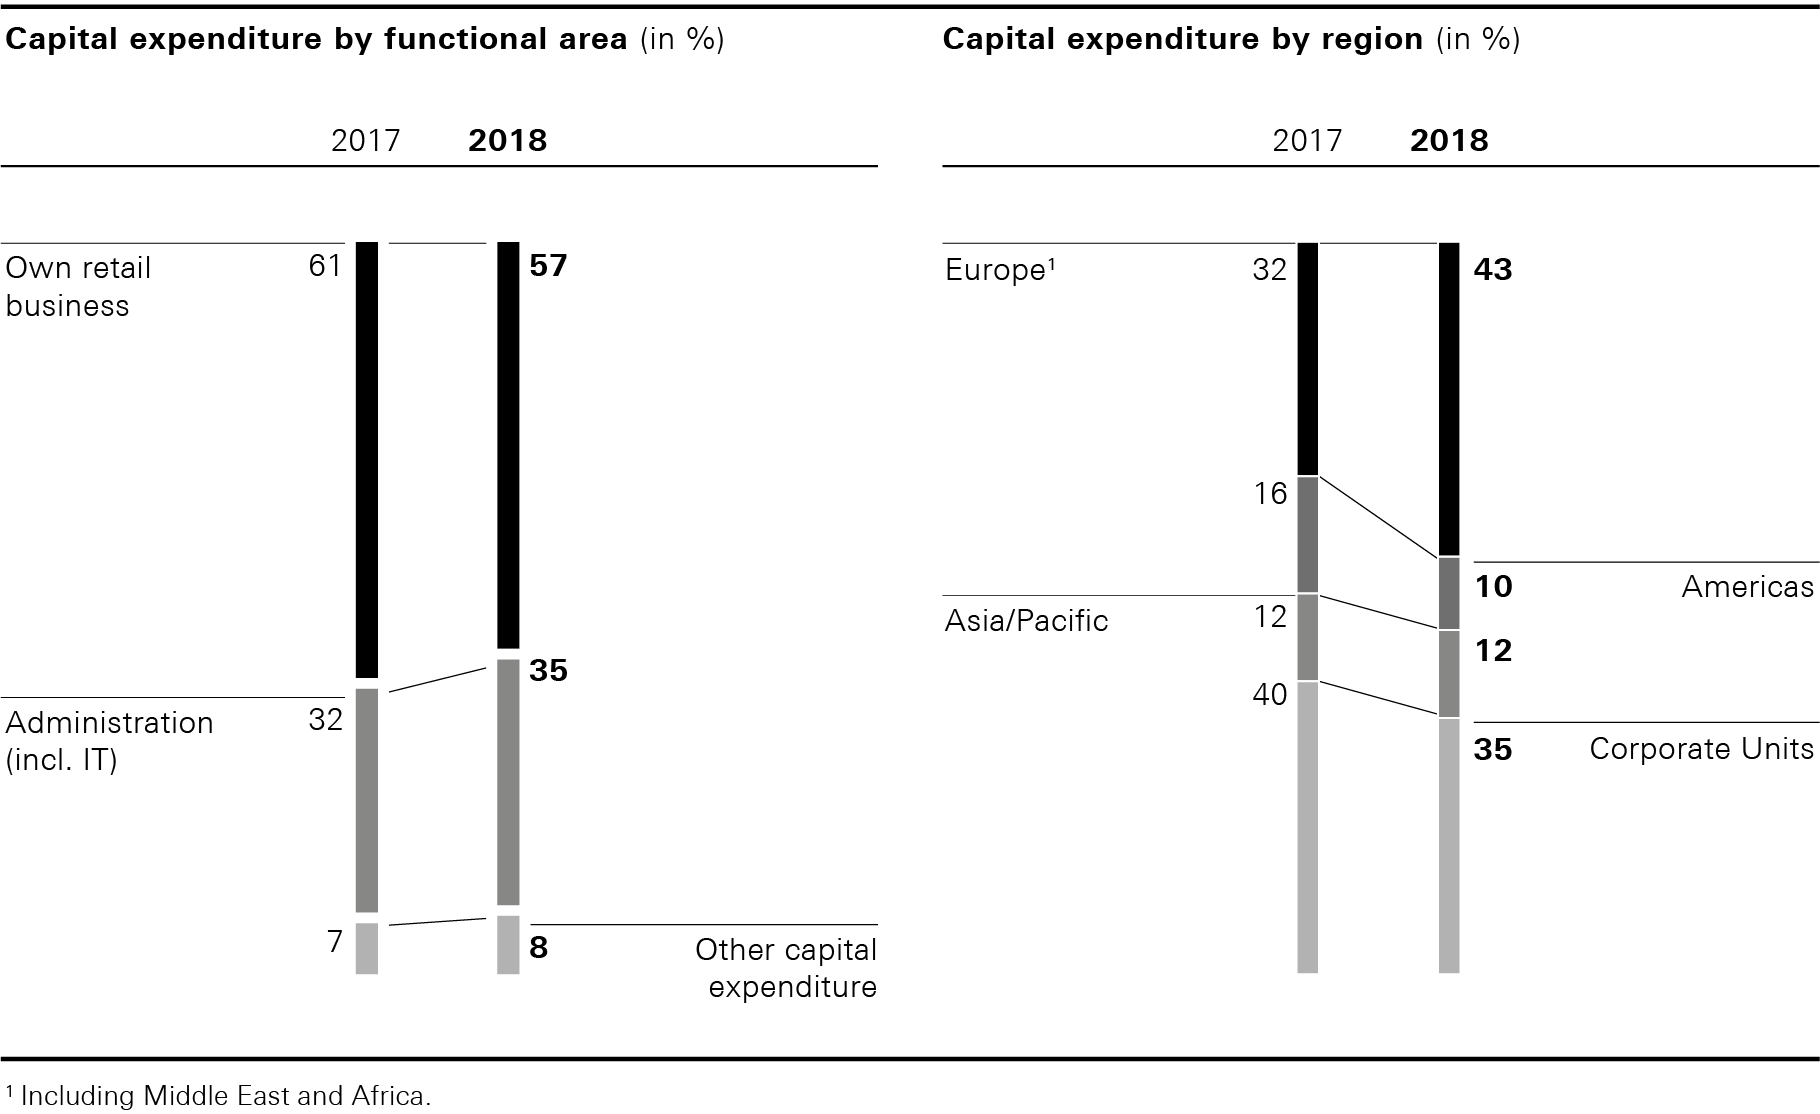 Capital expenditure by functional area and by region (bar chart)